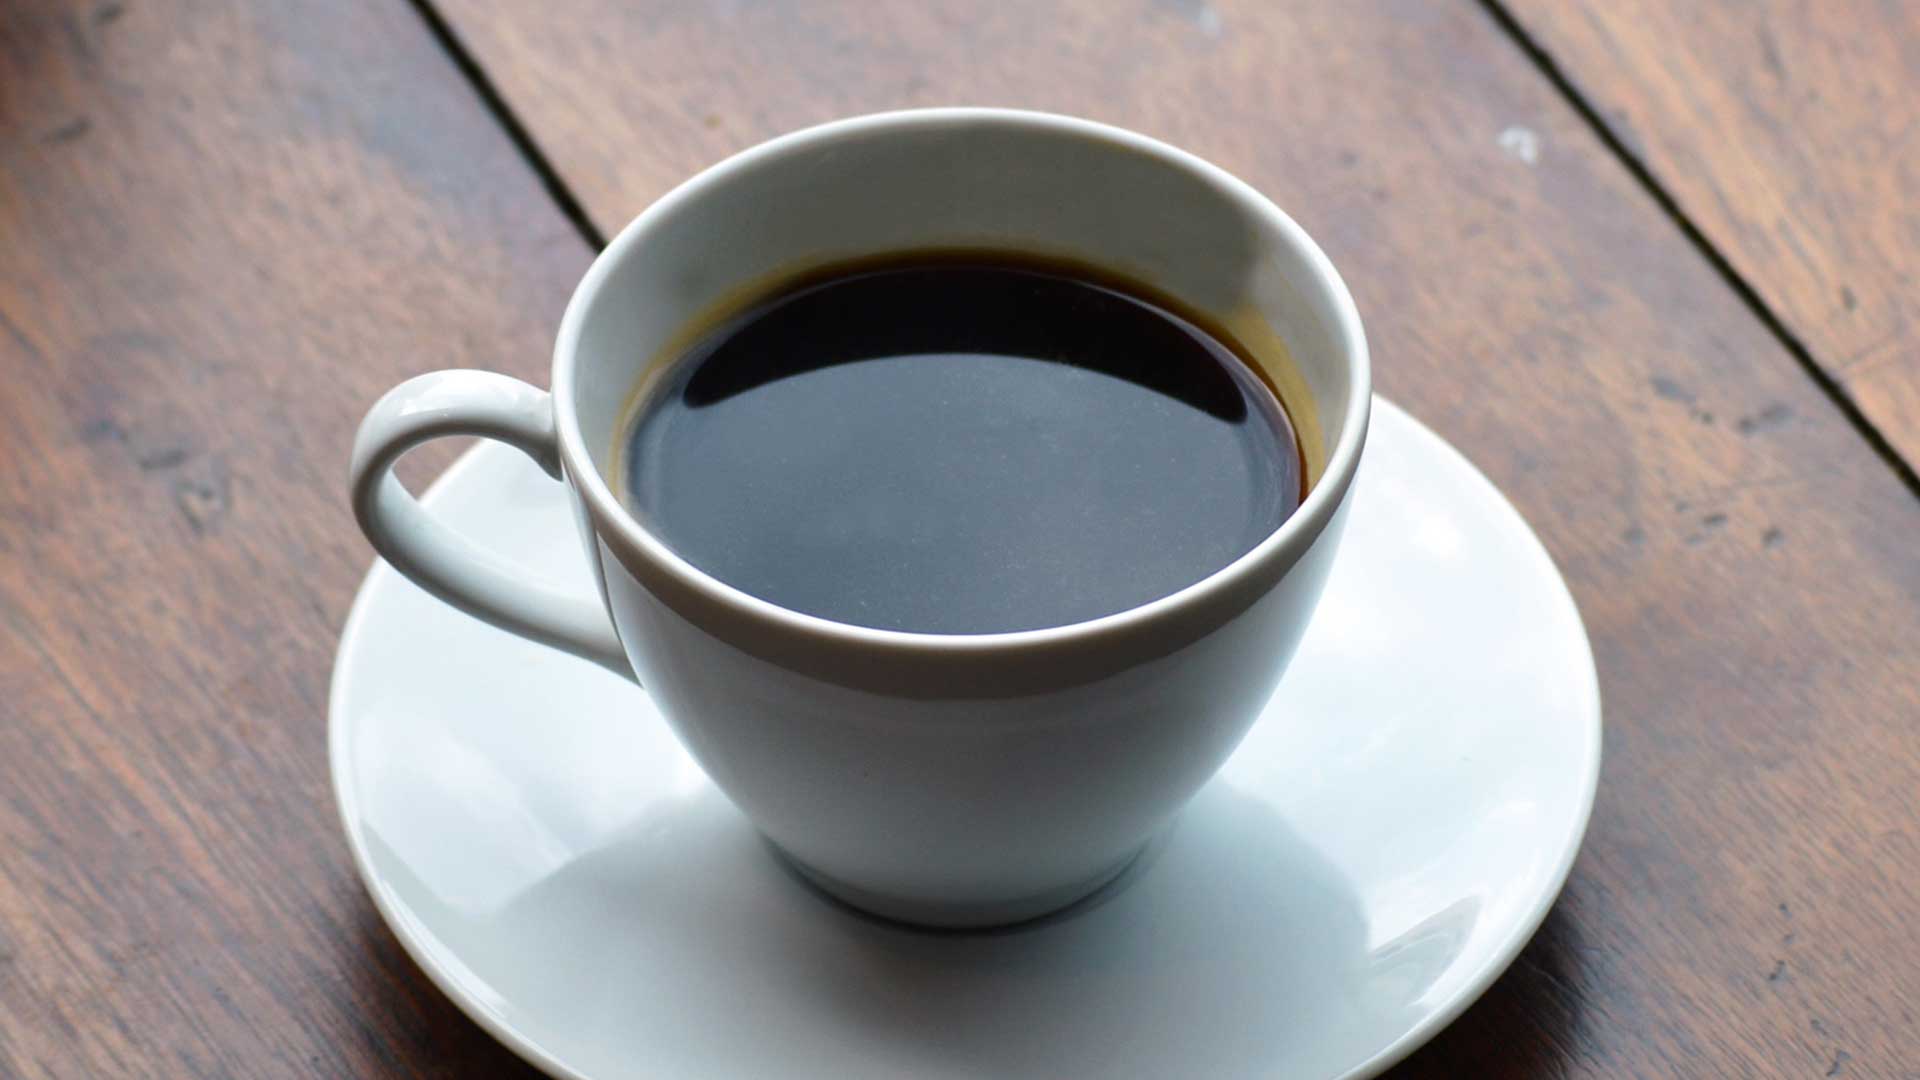 Americano coffee, what is the story behind this classic drink?